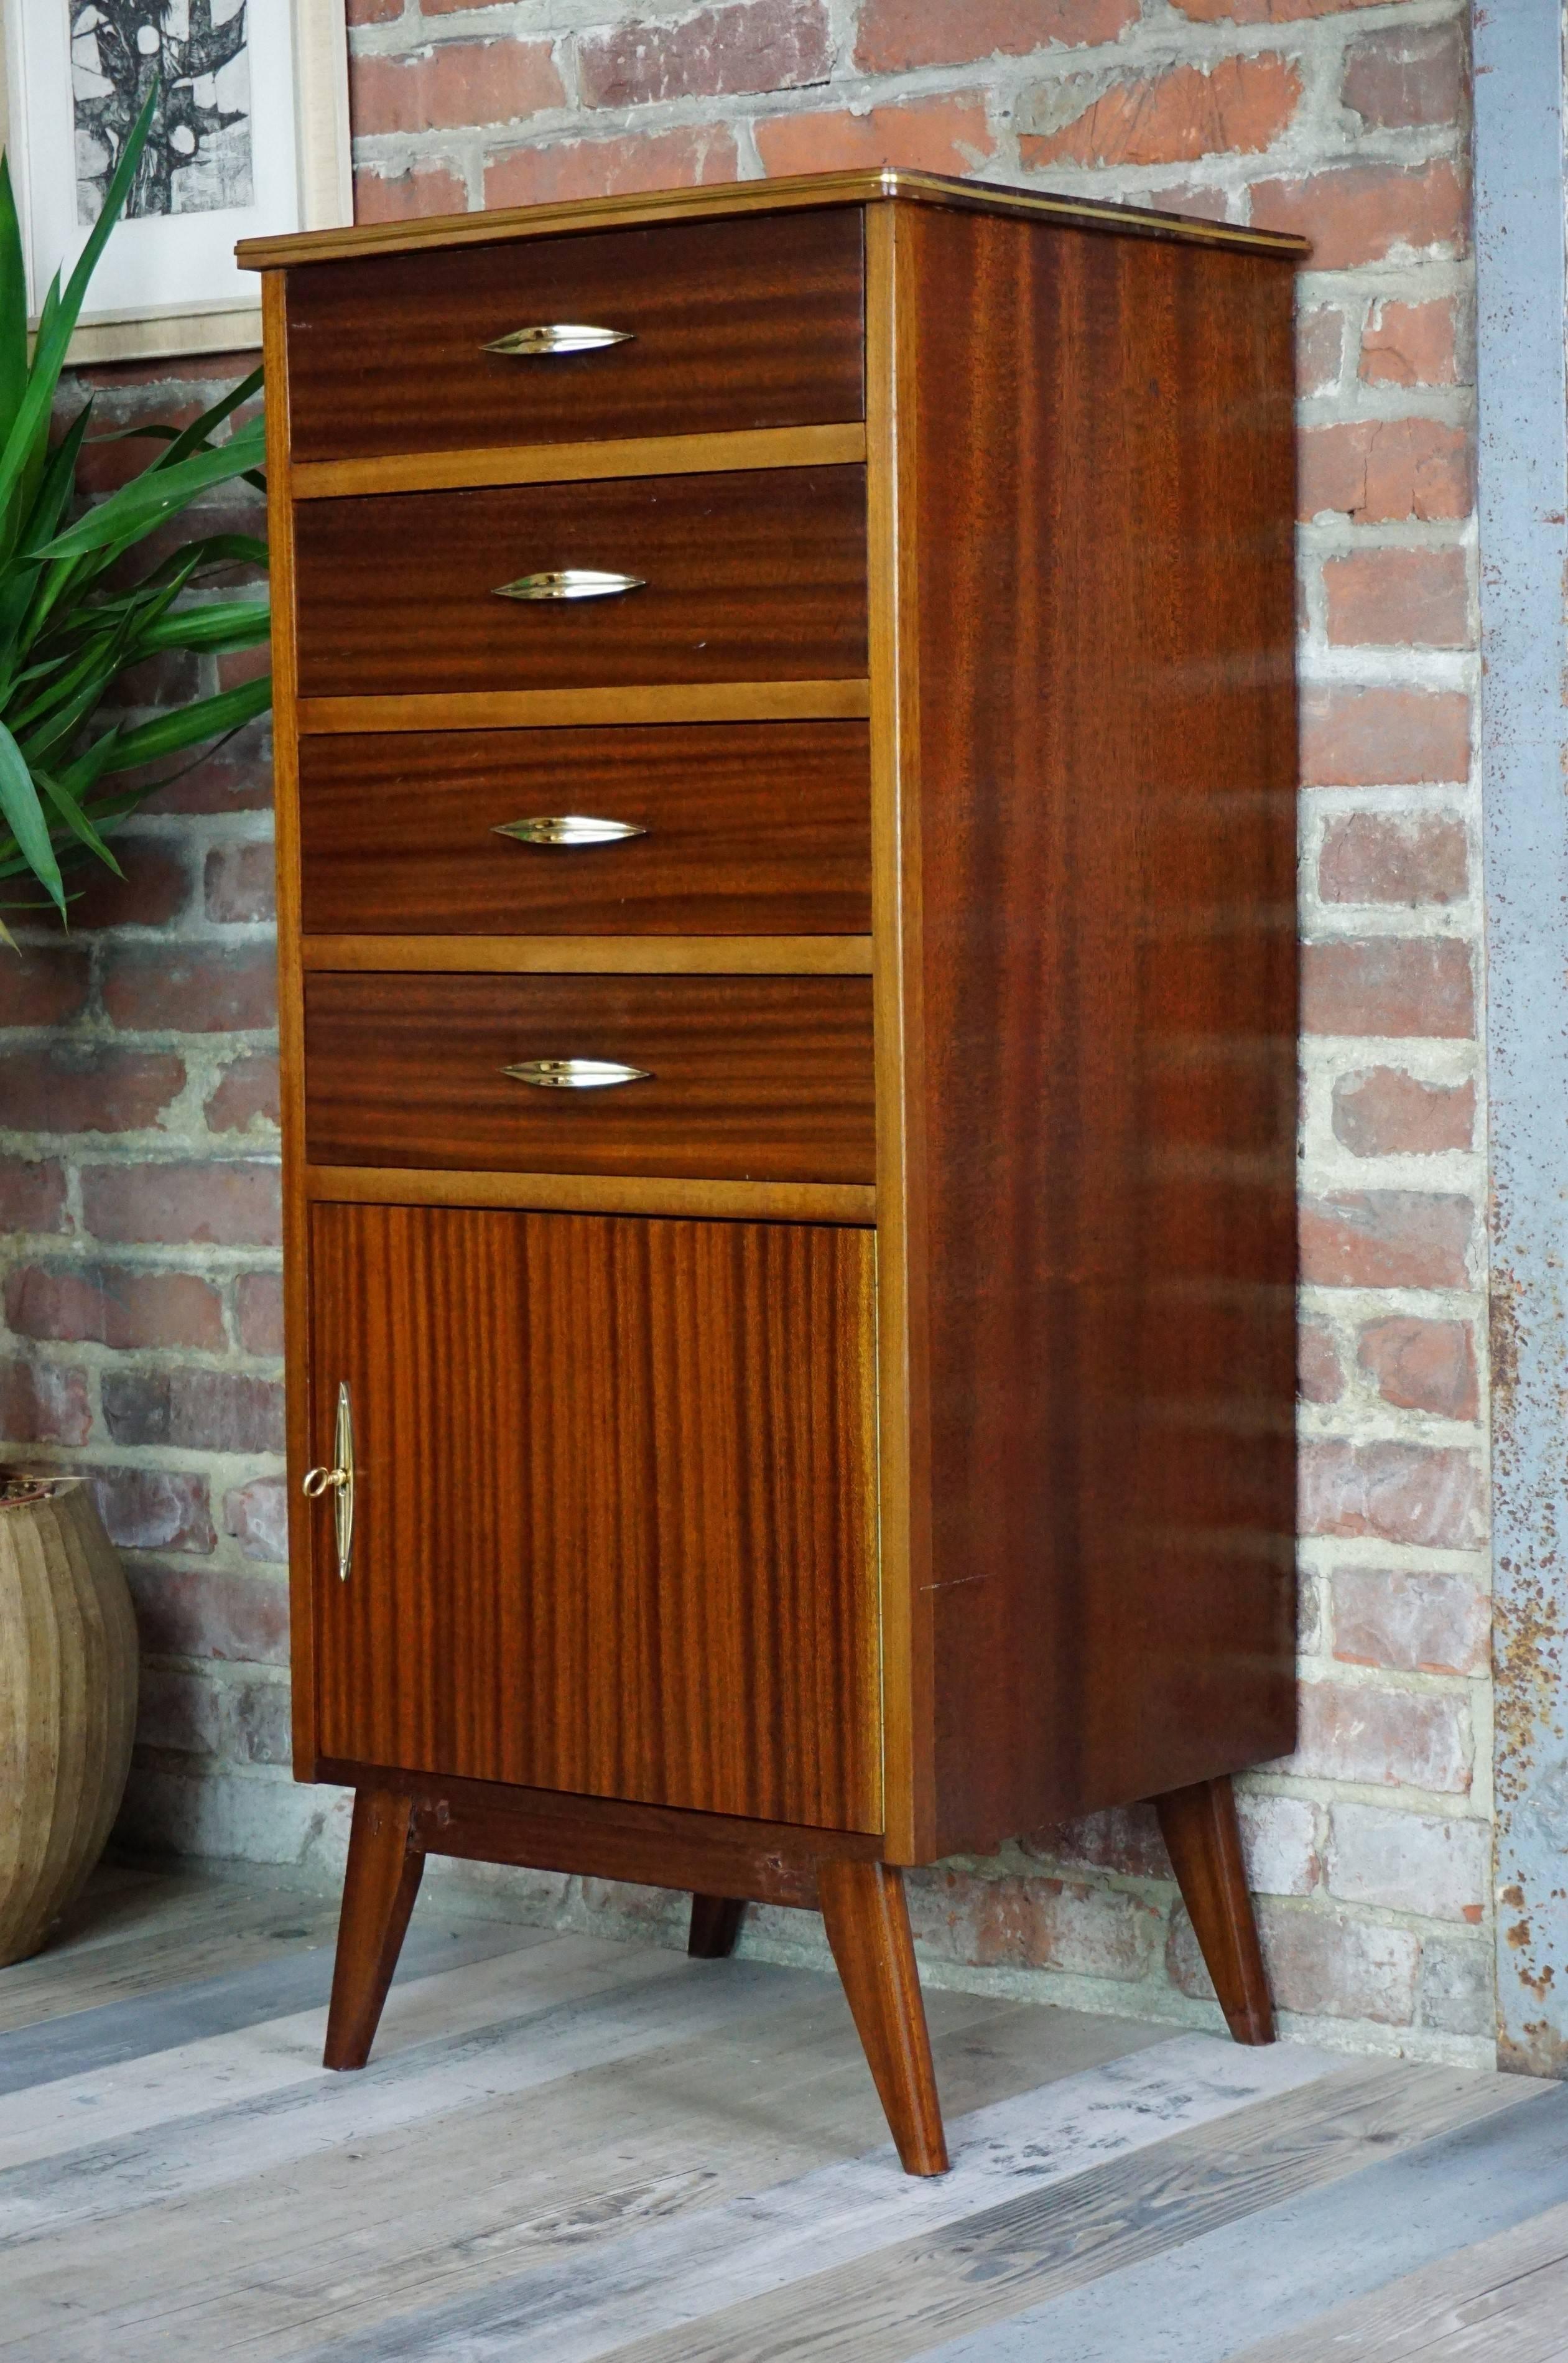 This high teak furniture design of the 1950s is very practical: compass feet, gilded metal handles, composed of four drawers and storage space downstairs ... a real space saving!